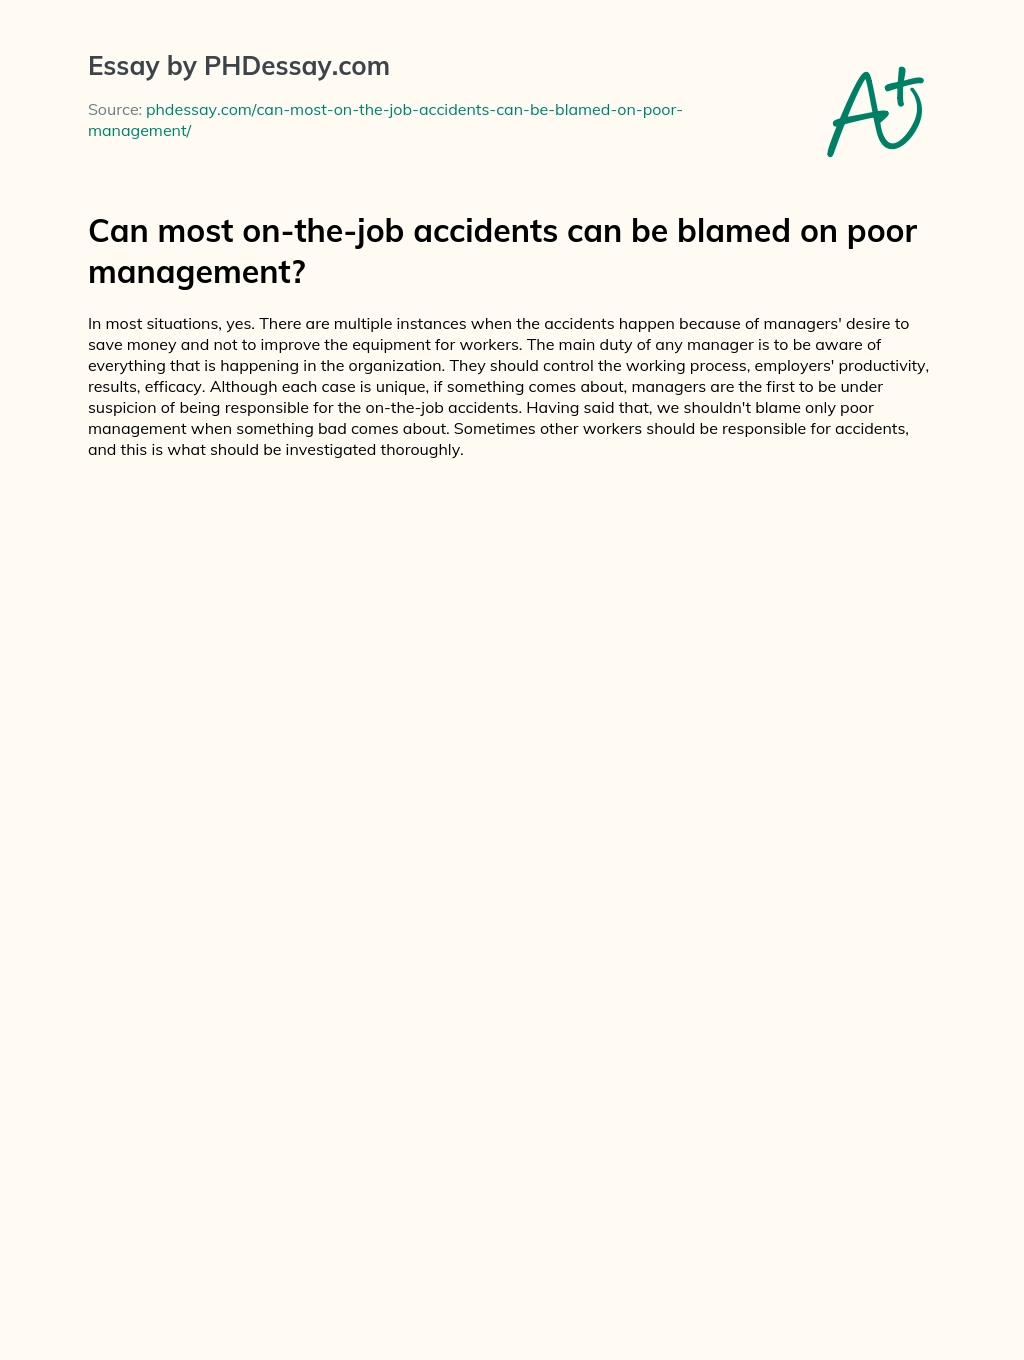 Can most on-the-job accidents can be blamed on poor management? essay